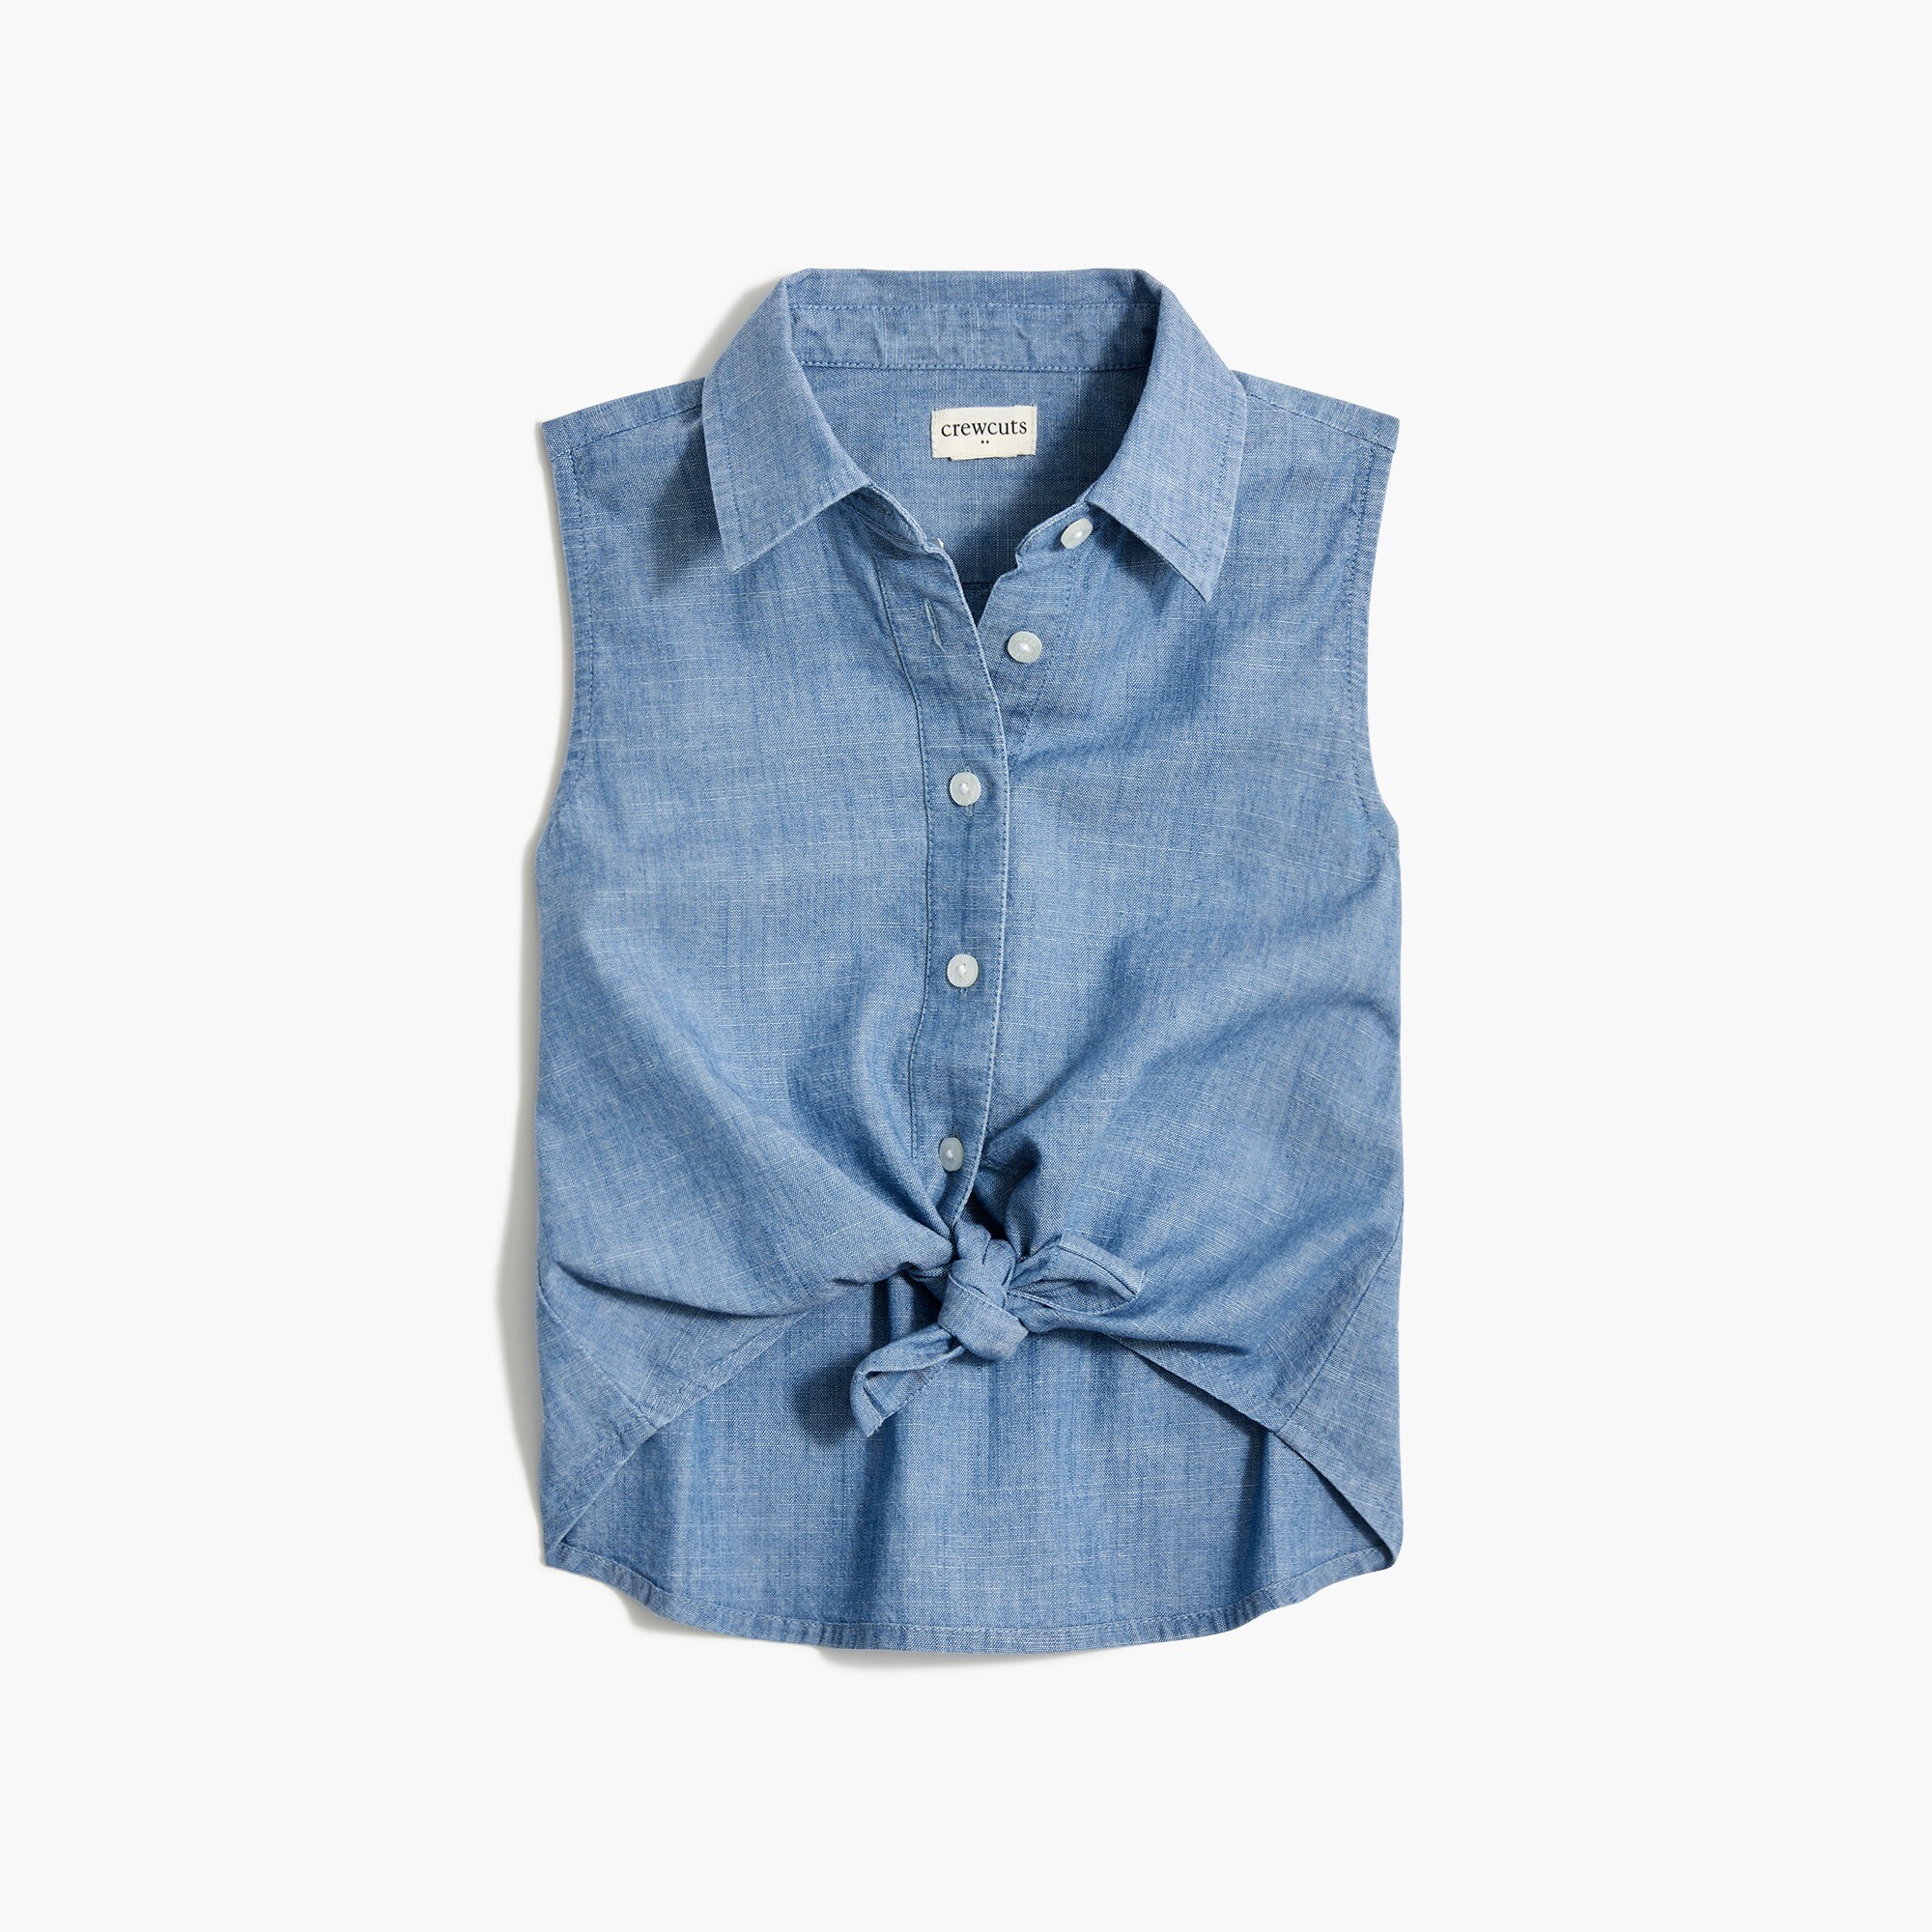  Girls' tie-front chambray button-up tank top